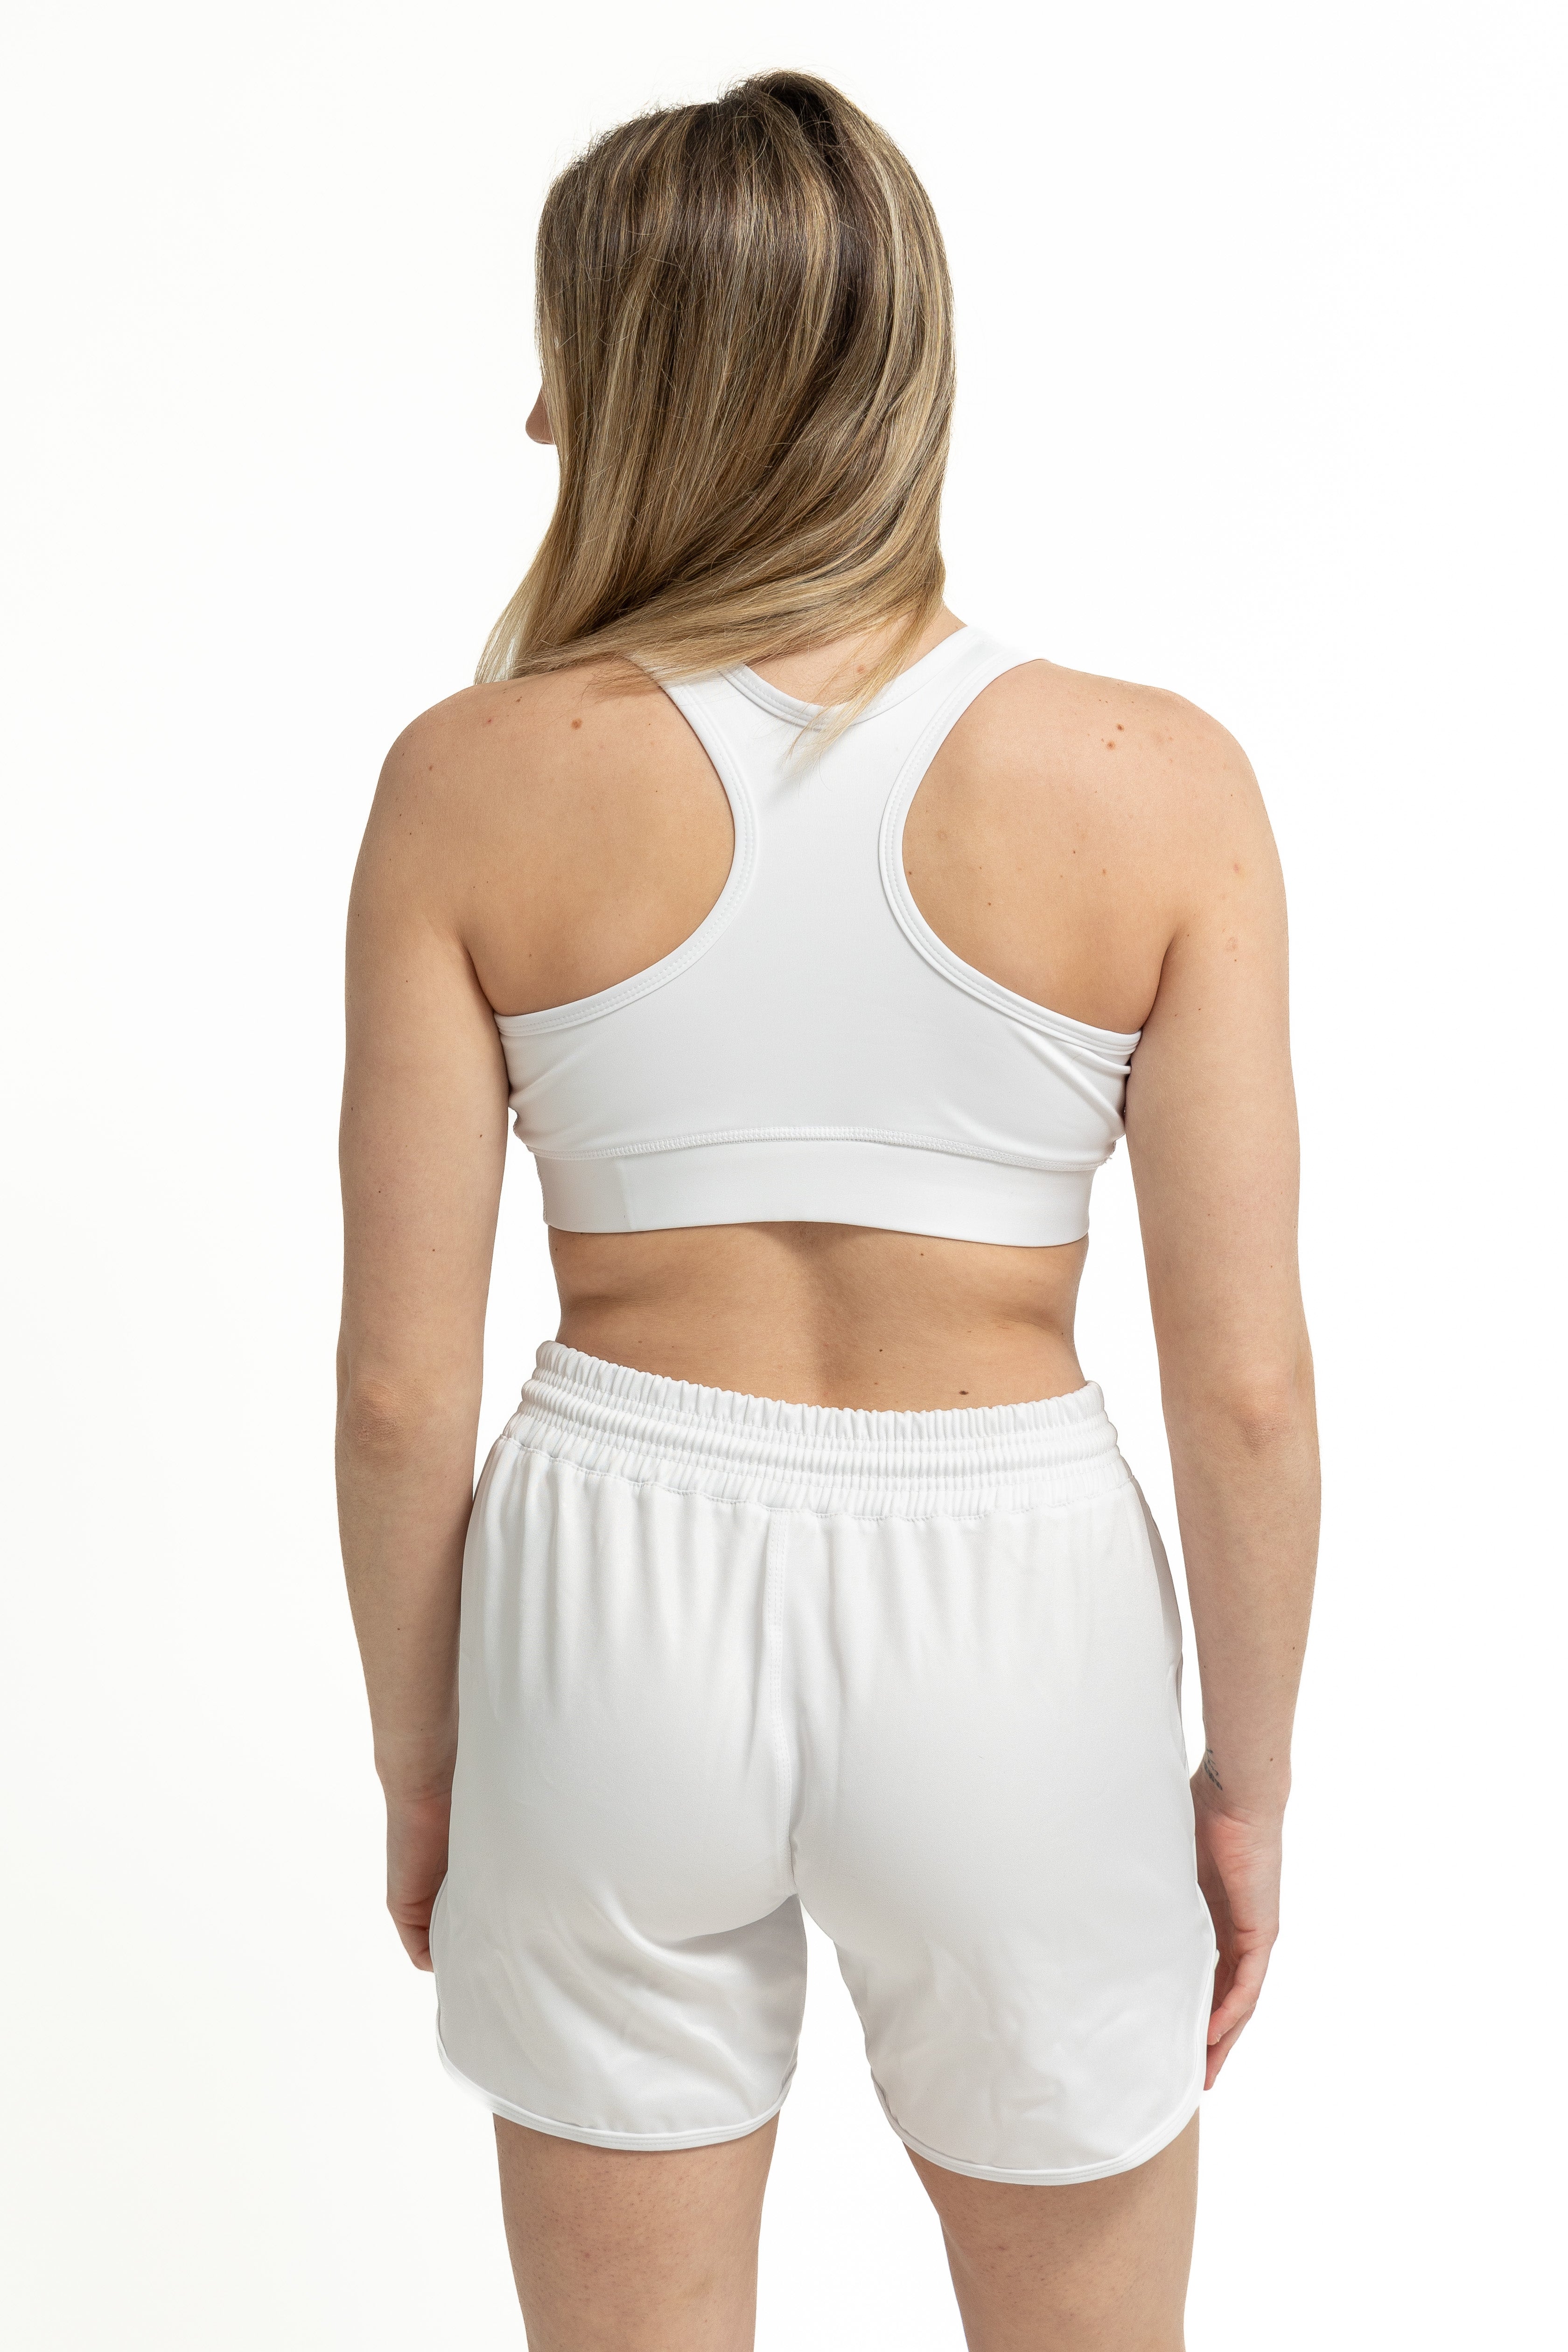 Girl modeling a white high-compression sports bra and white athletic shorts